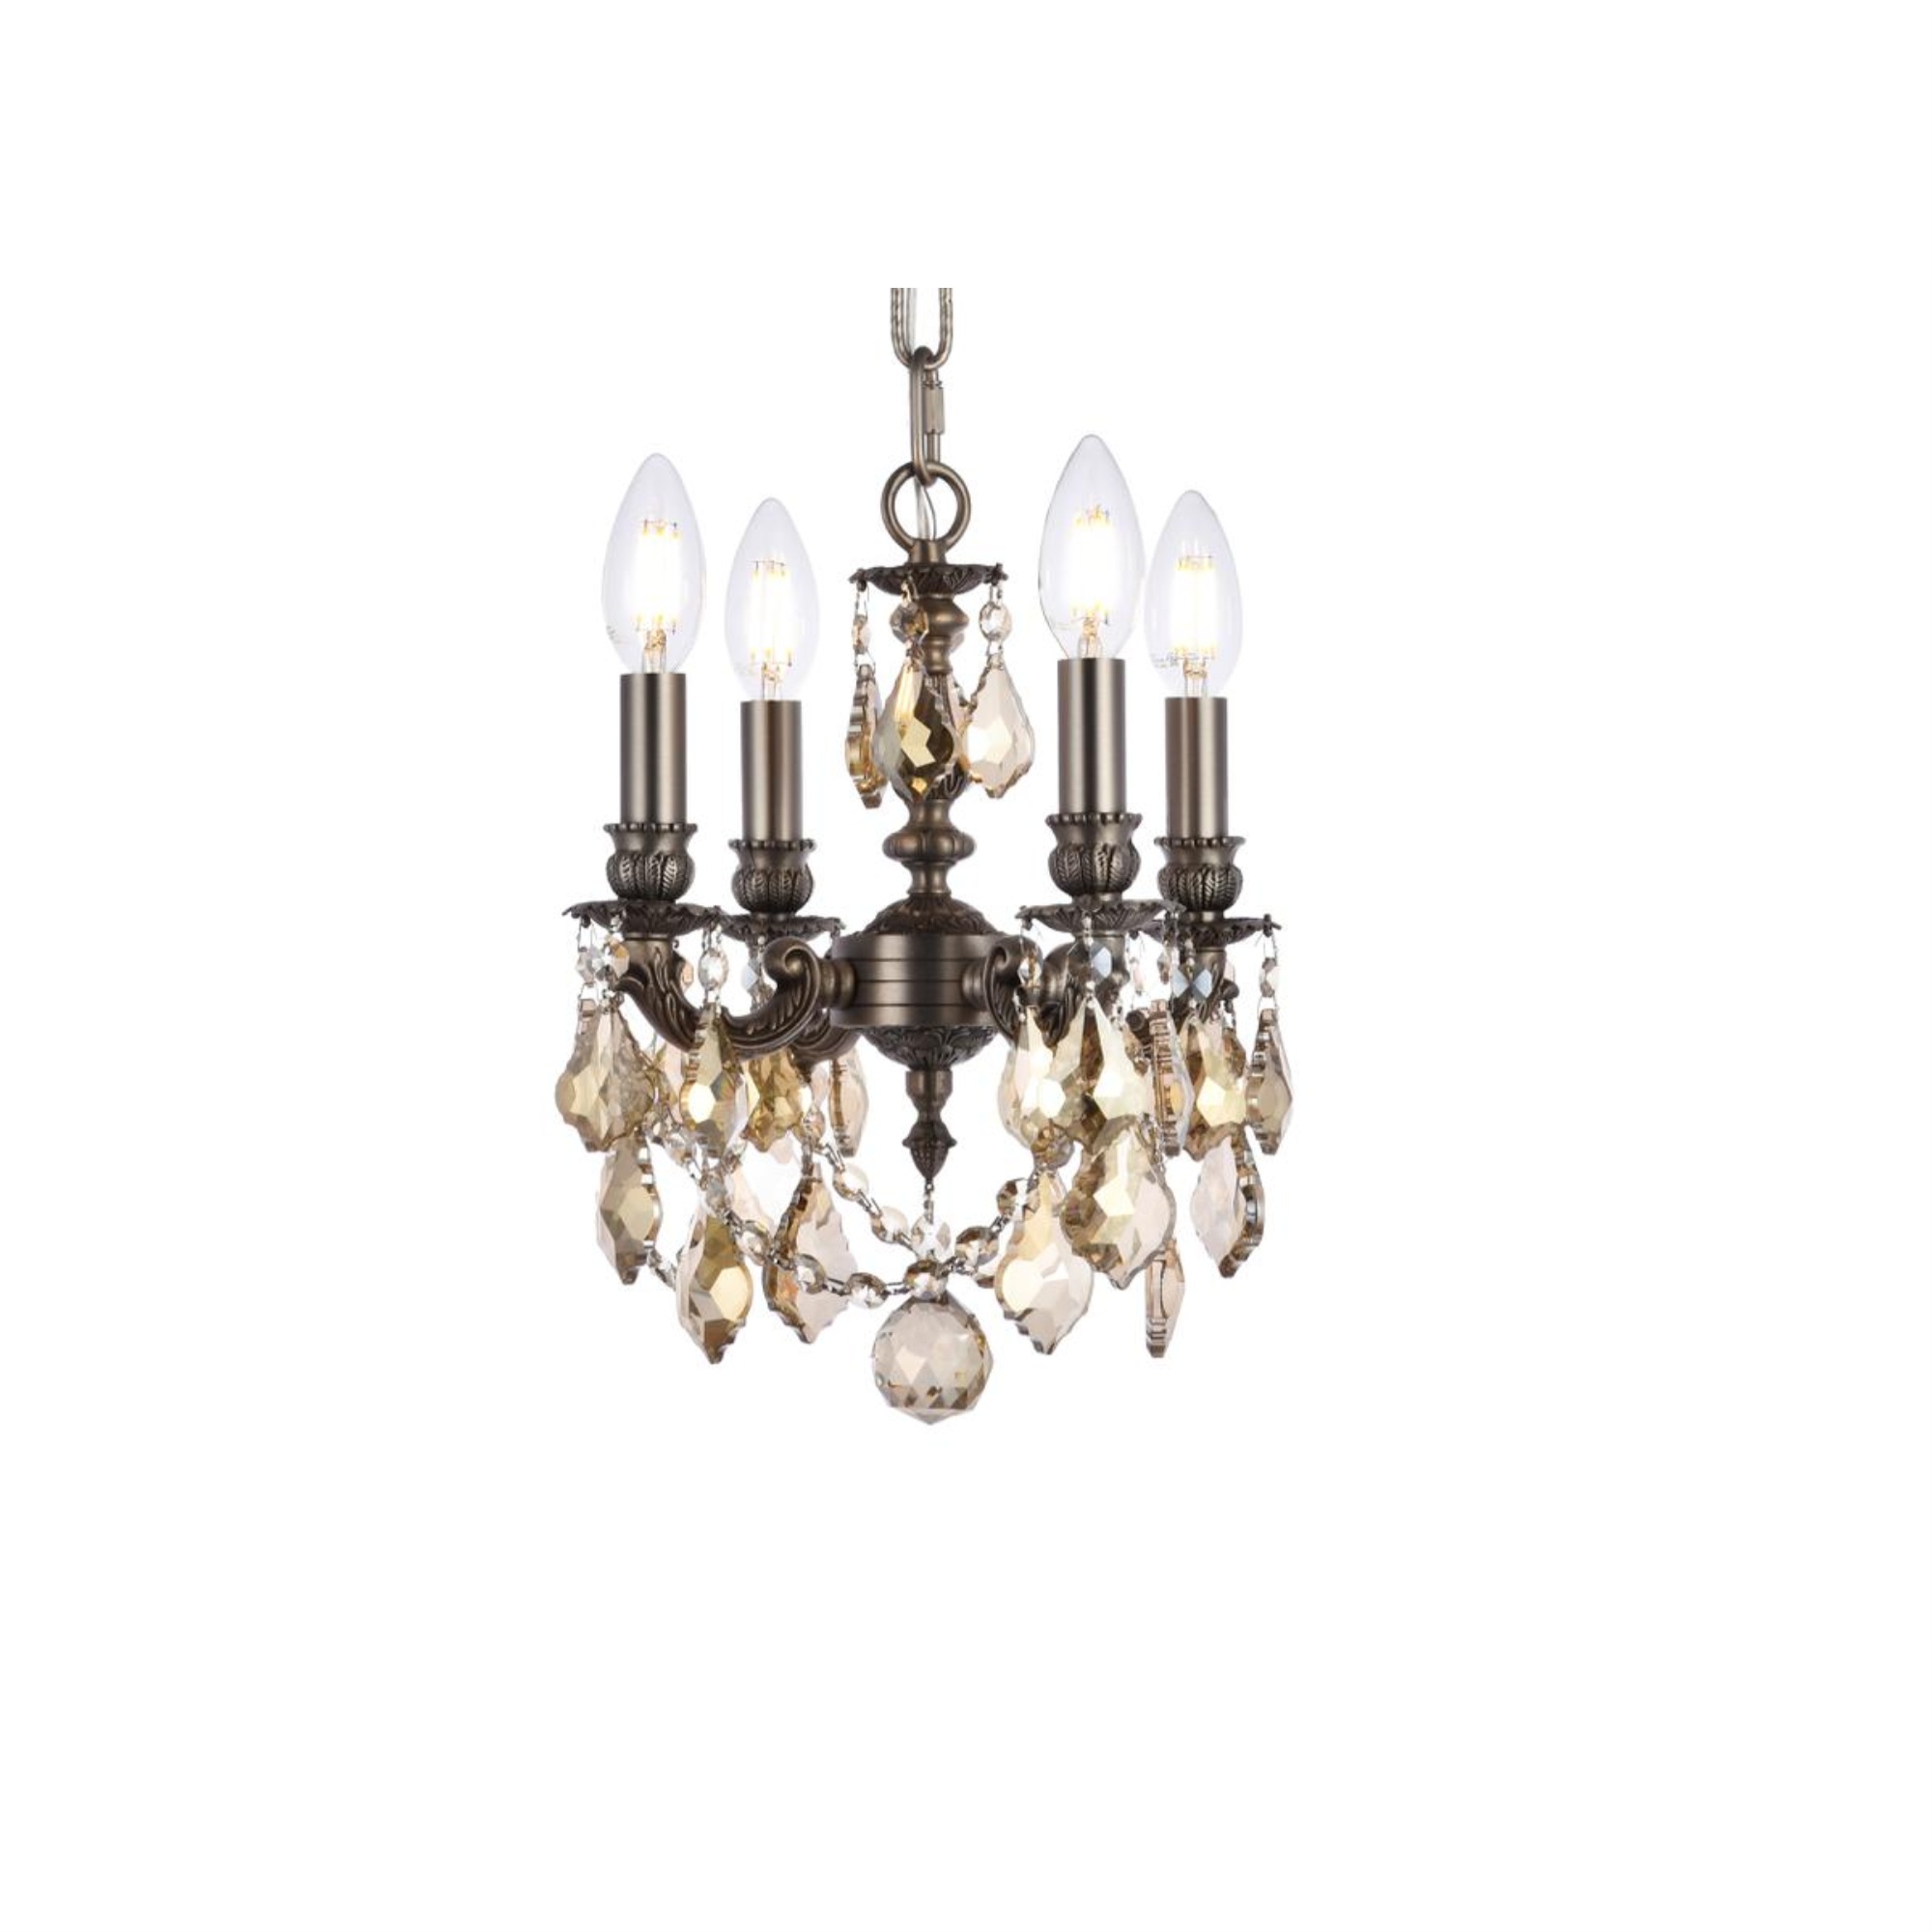 Elegant Lighting 9104 Lillie Collection Pendant D:10in H:10in Lt:4 Pewter Finish (Royal Cut Crystals)